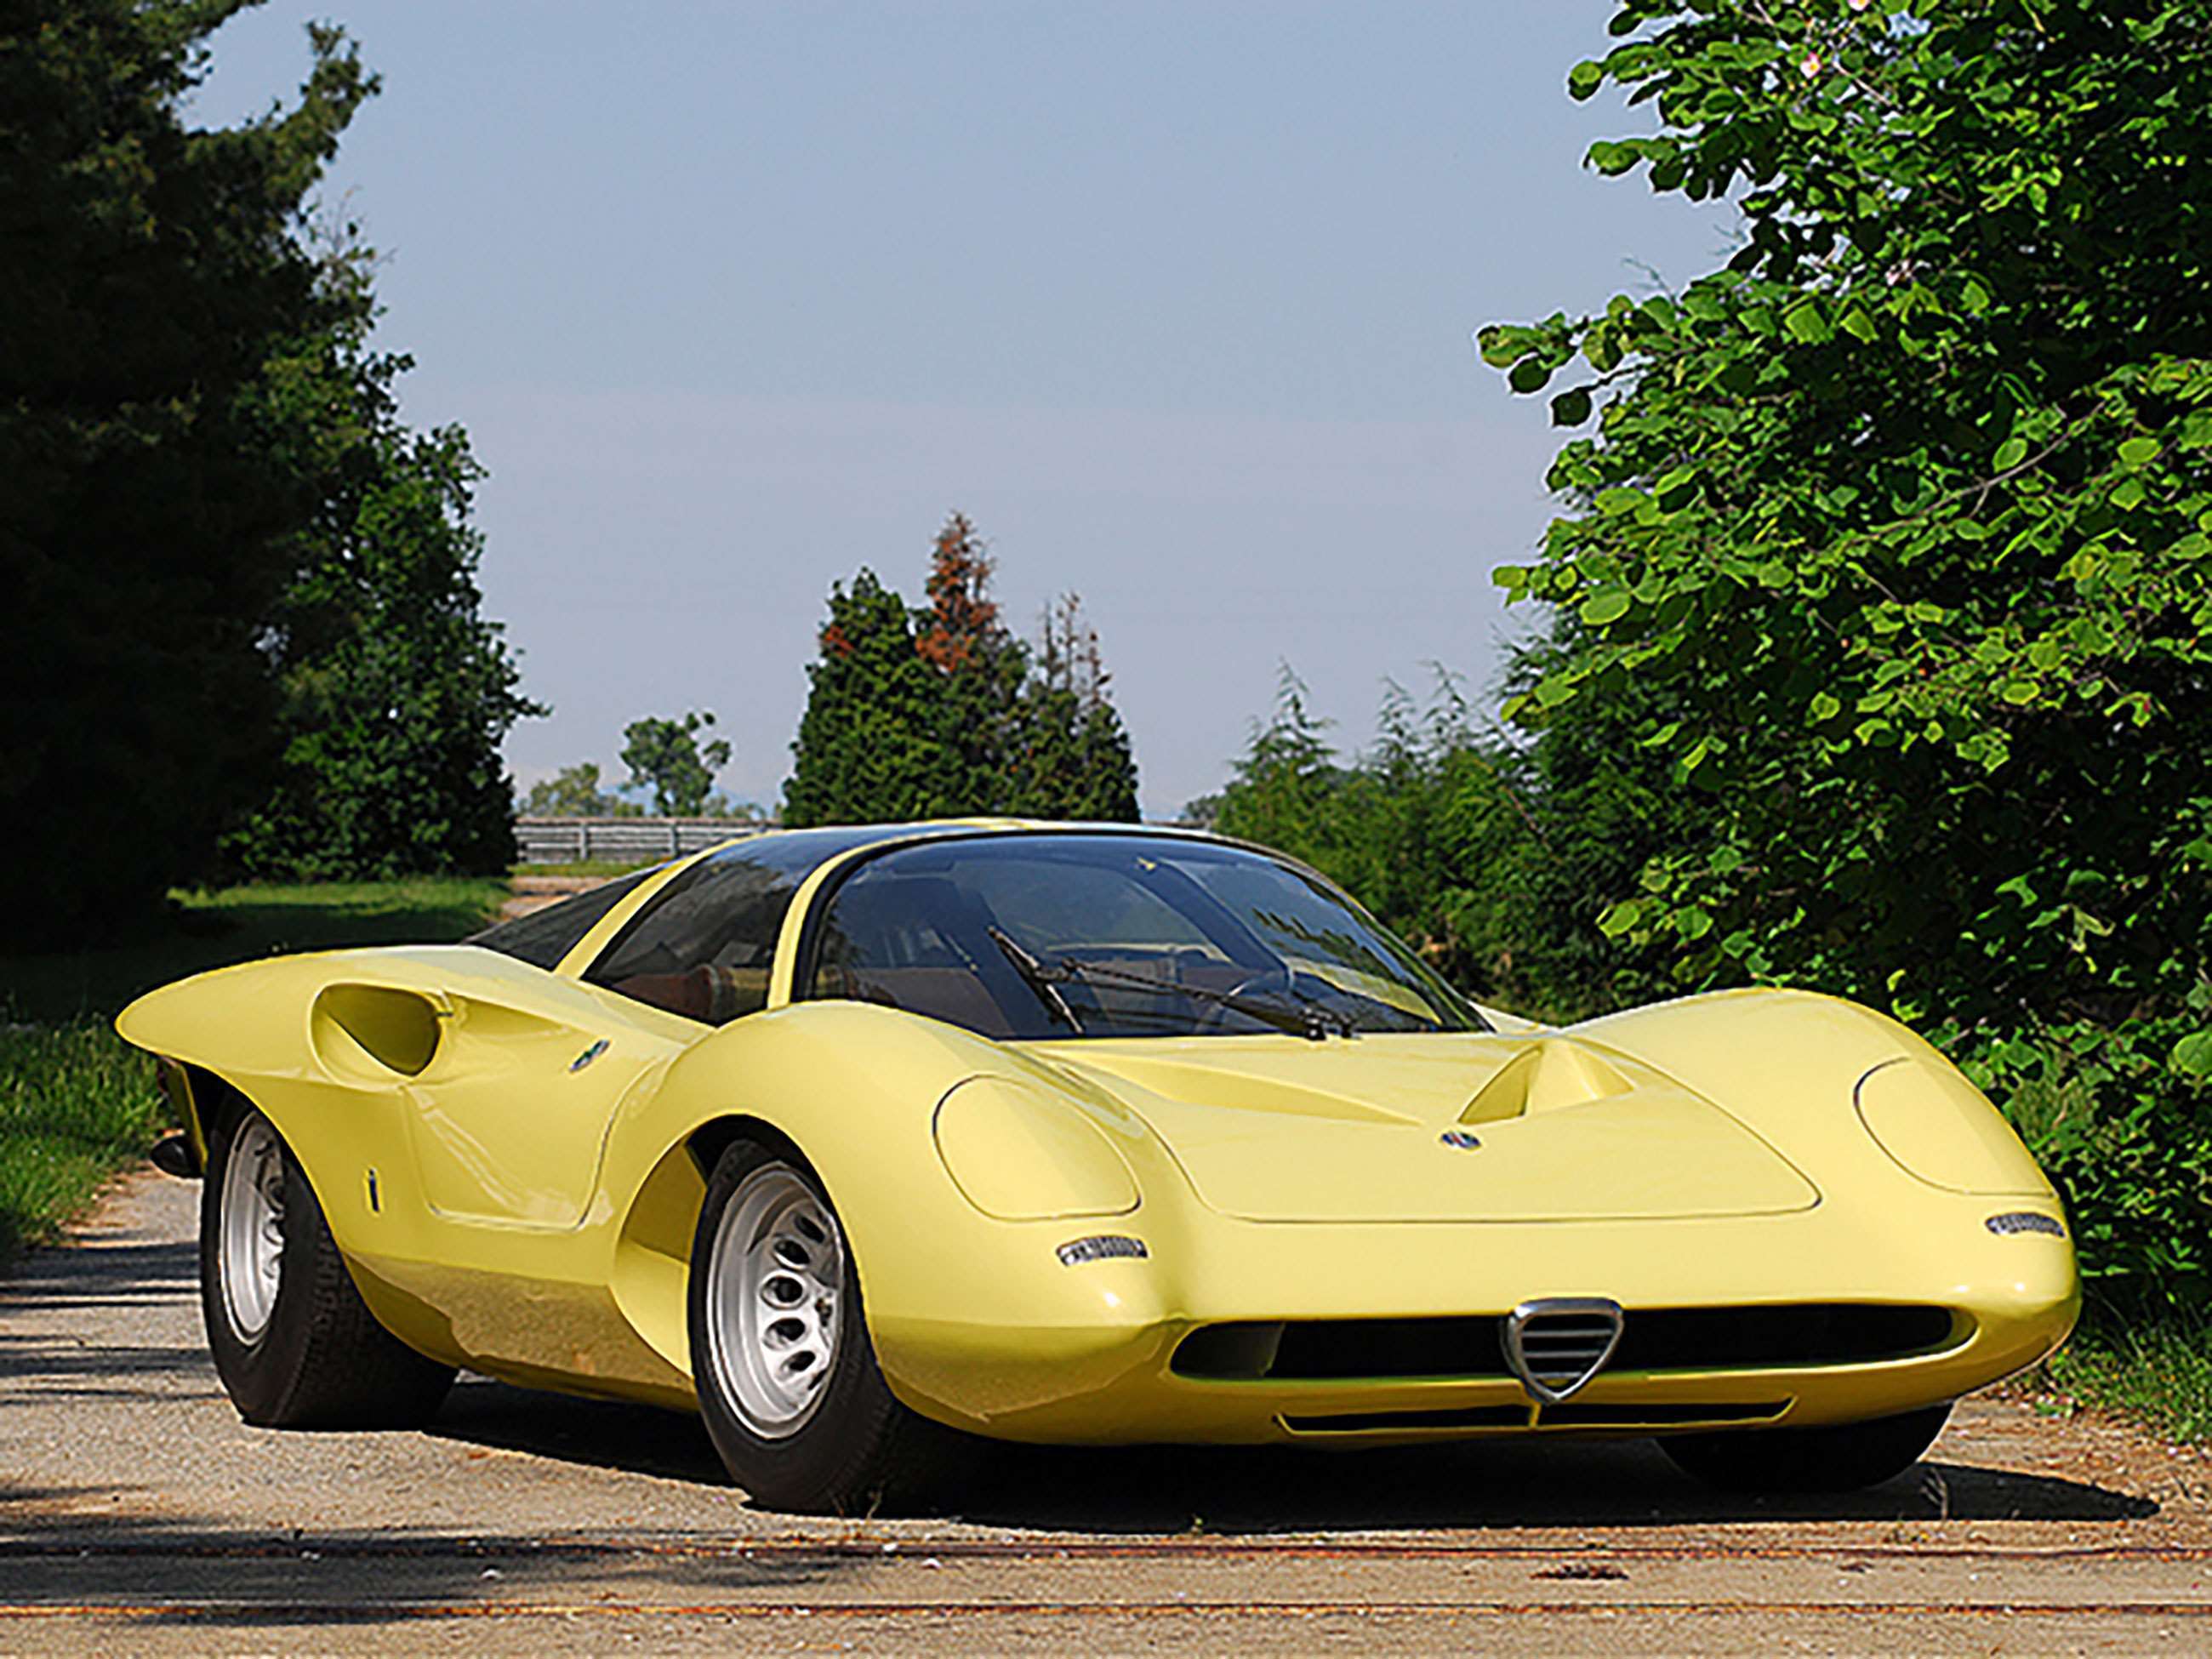 six-concepts-based-on-the-alfa-romeo-33-stradale-5-alfa-romeo-33-2-coupe-speciale-goodwood-24042020.jpg